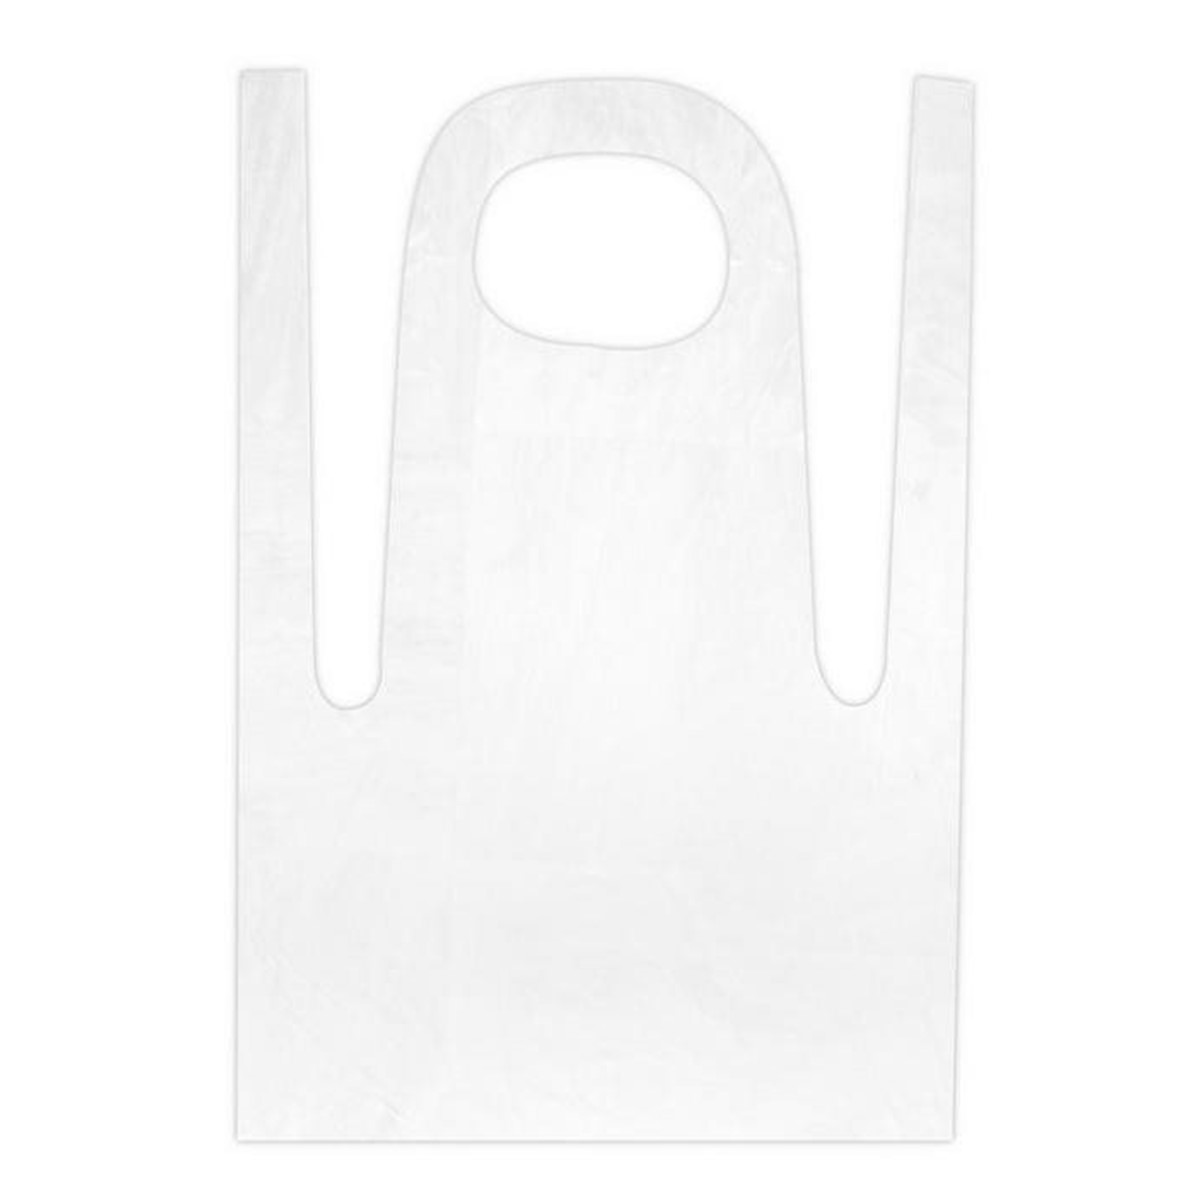 Reliance Protect Disposable Polythene Aprons - 100 aprons